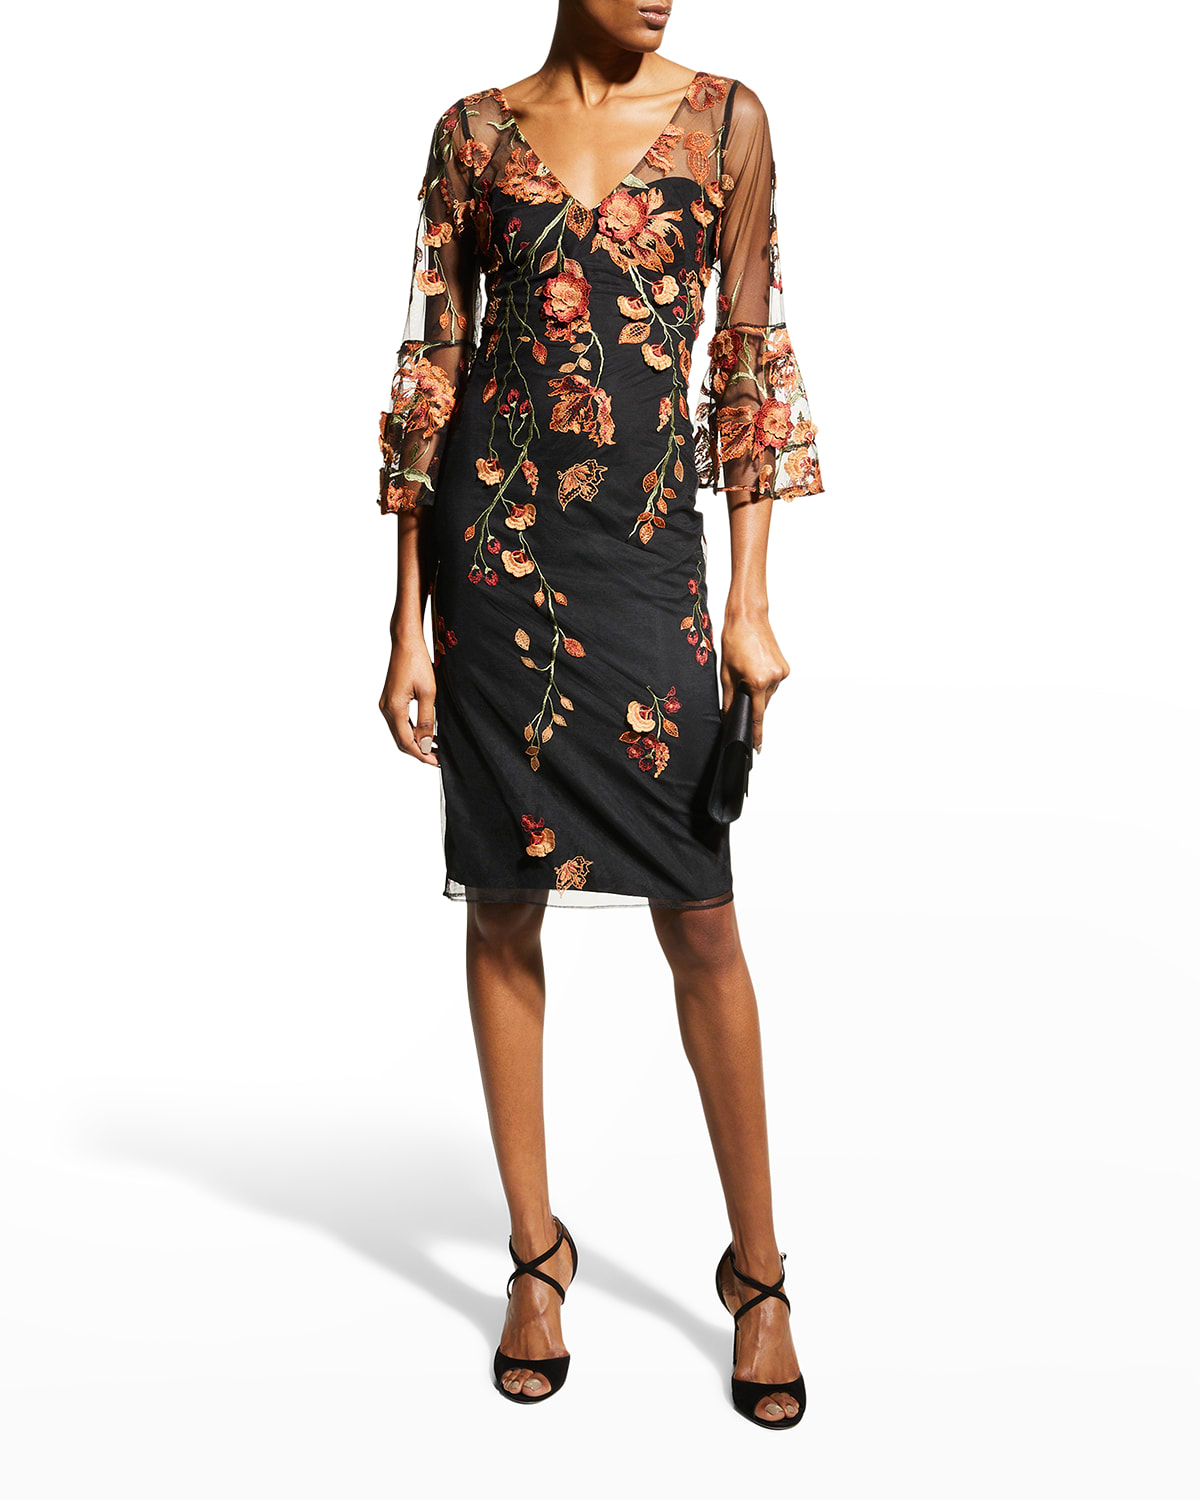 MARCHESA NOTTE FLORAL-EMBROIDERED BELL-SLEEVE DRESS,PROD245560340